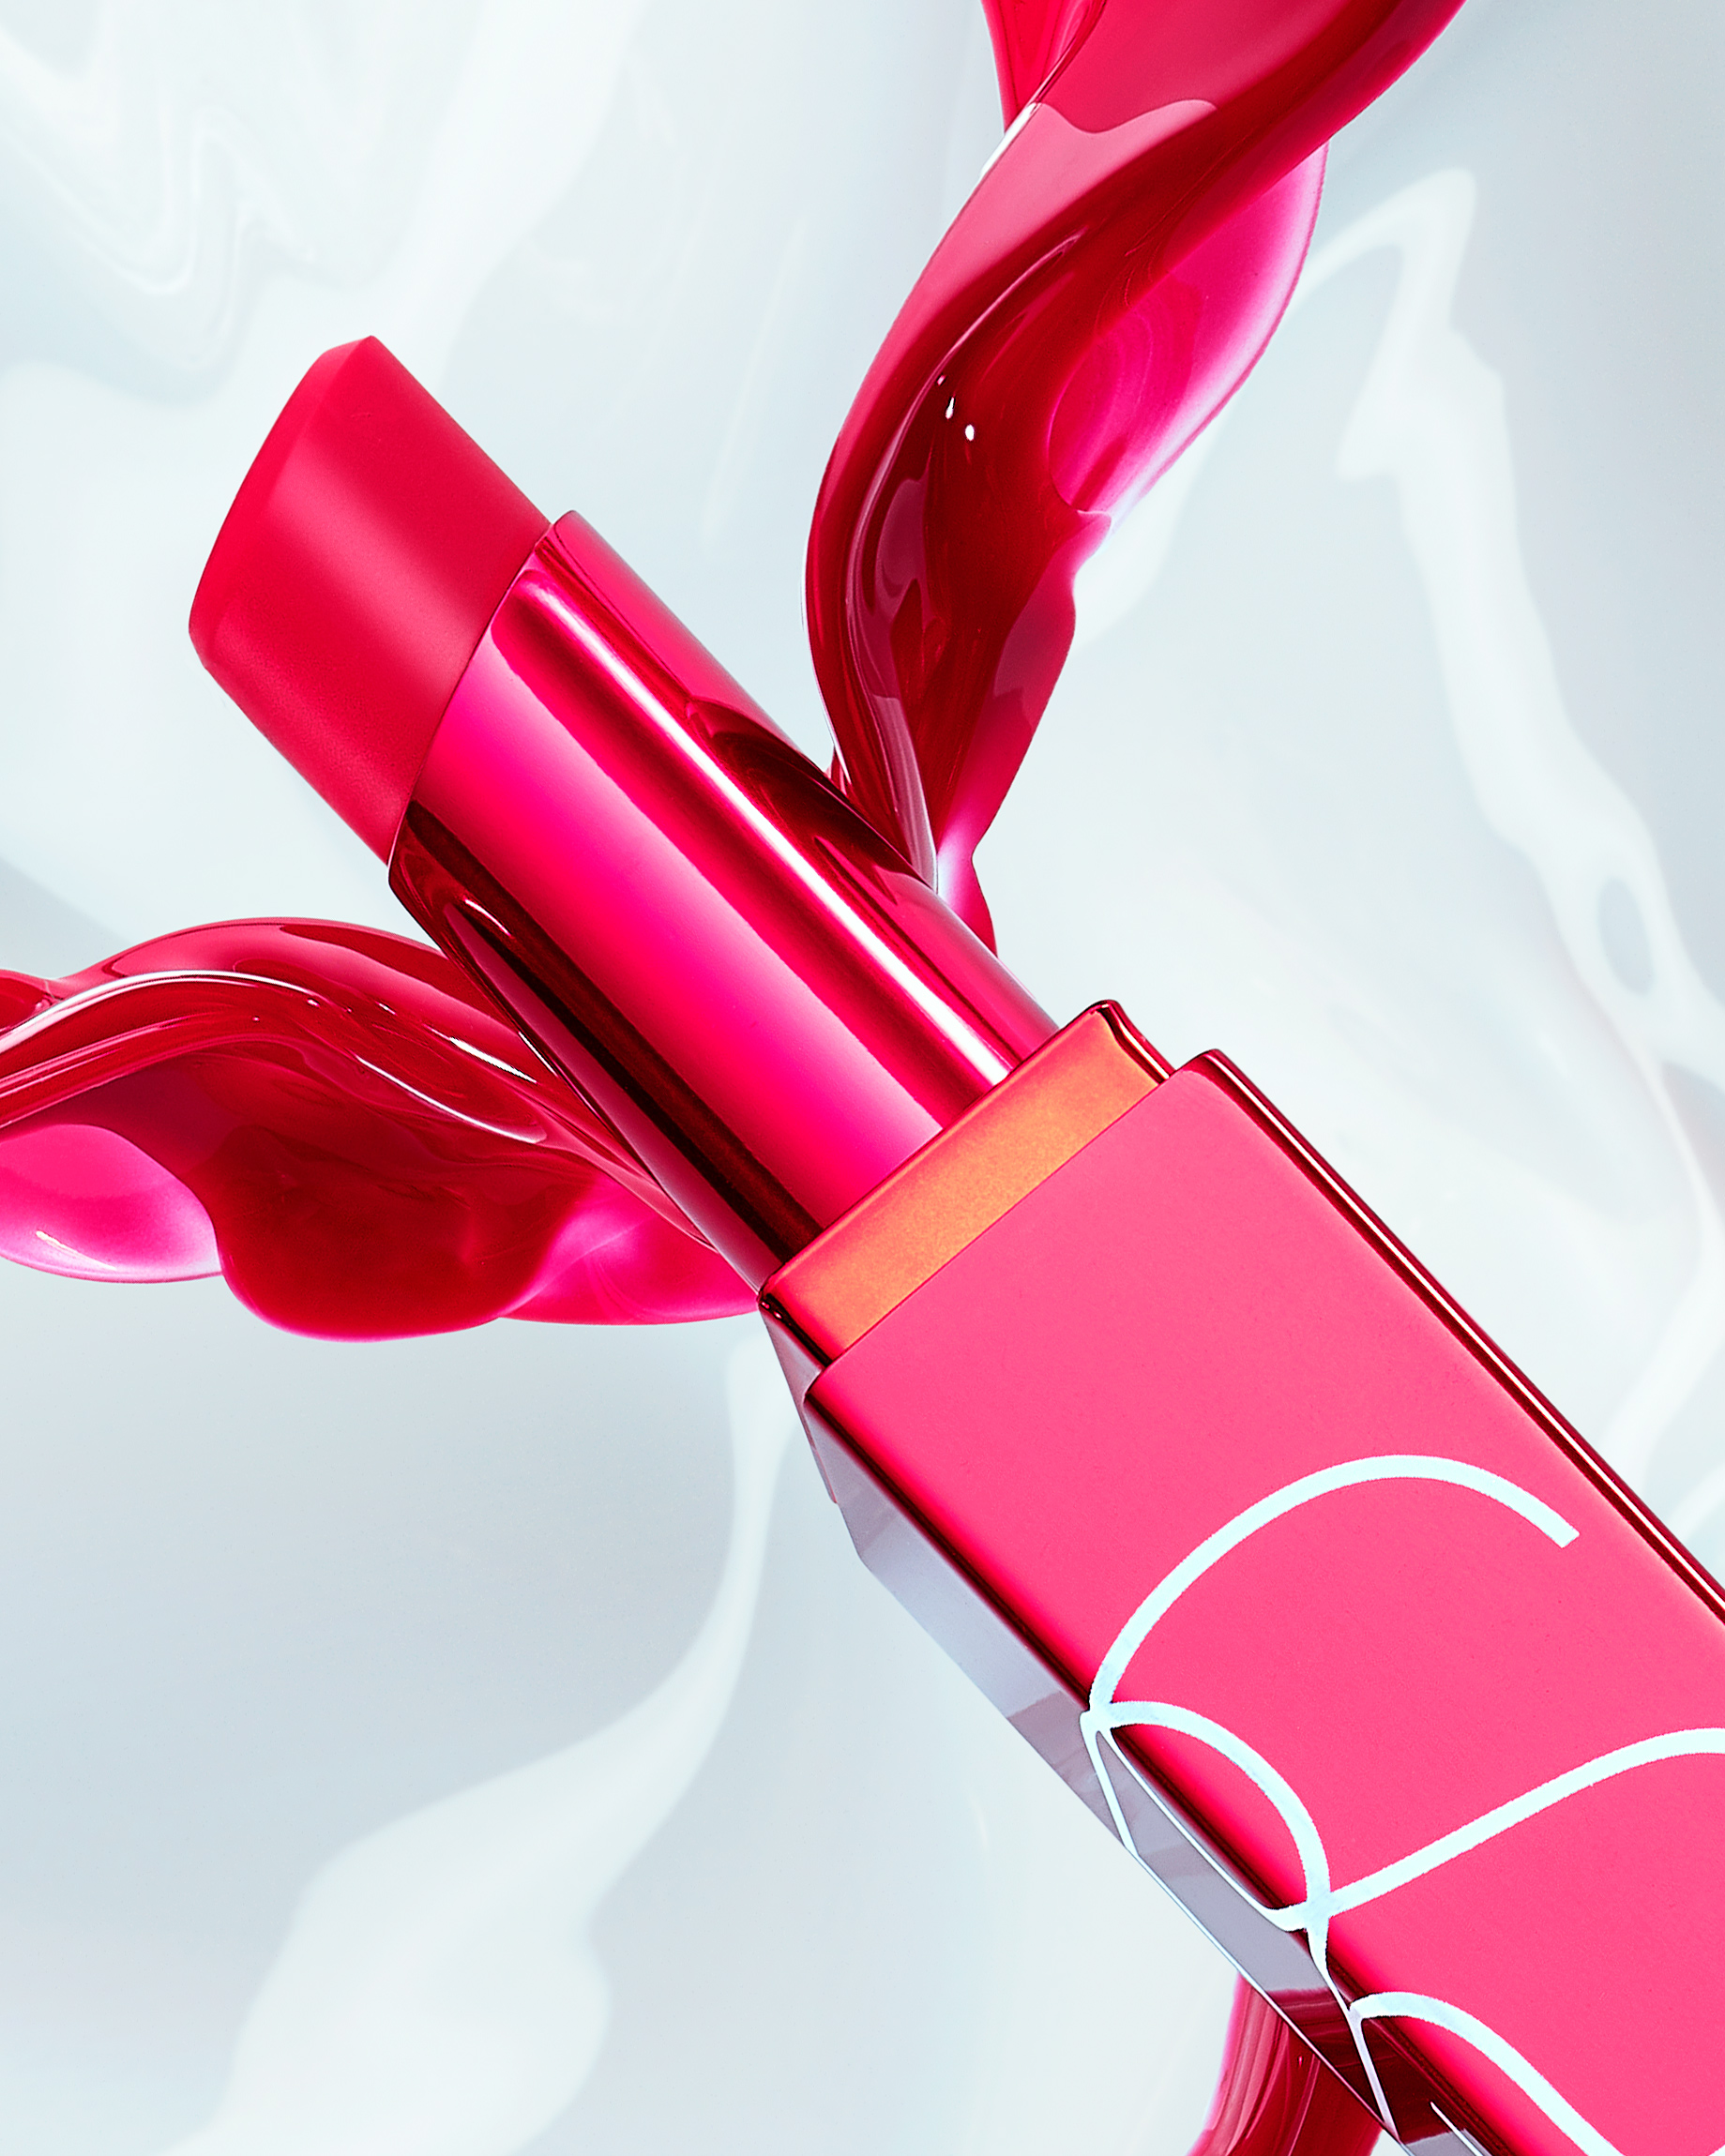 welsh-tidepool-simmons-lipstick-splash-nar-cosmetic-product-red-liquid-photography_color_closeup